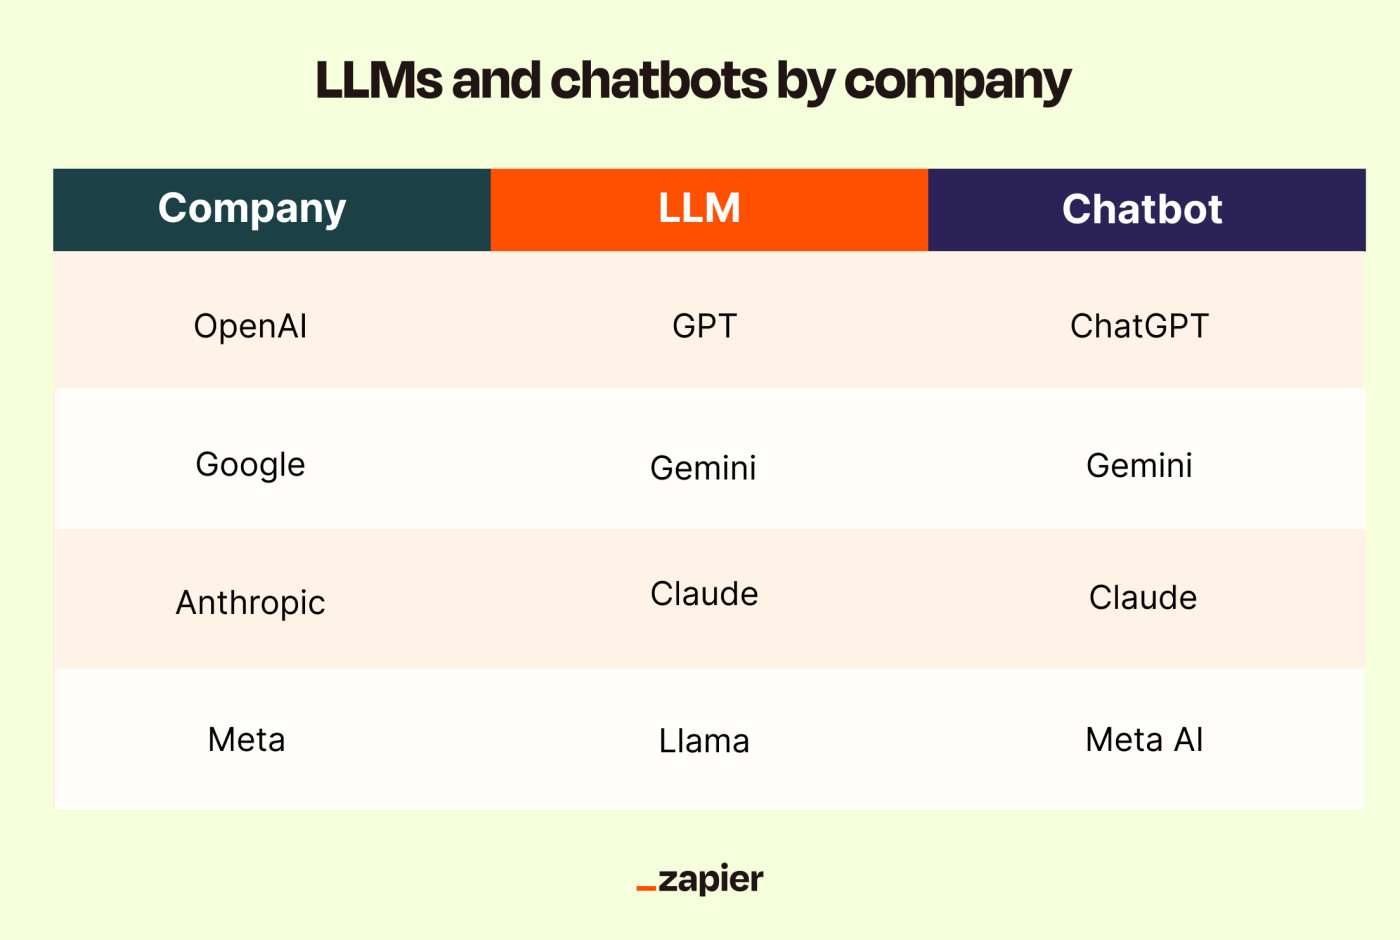 An infographic showing the names of  OpenAI's, Google's, Anthropic's, and Meta's LLMs and chatbots